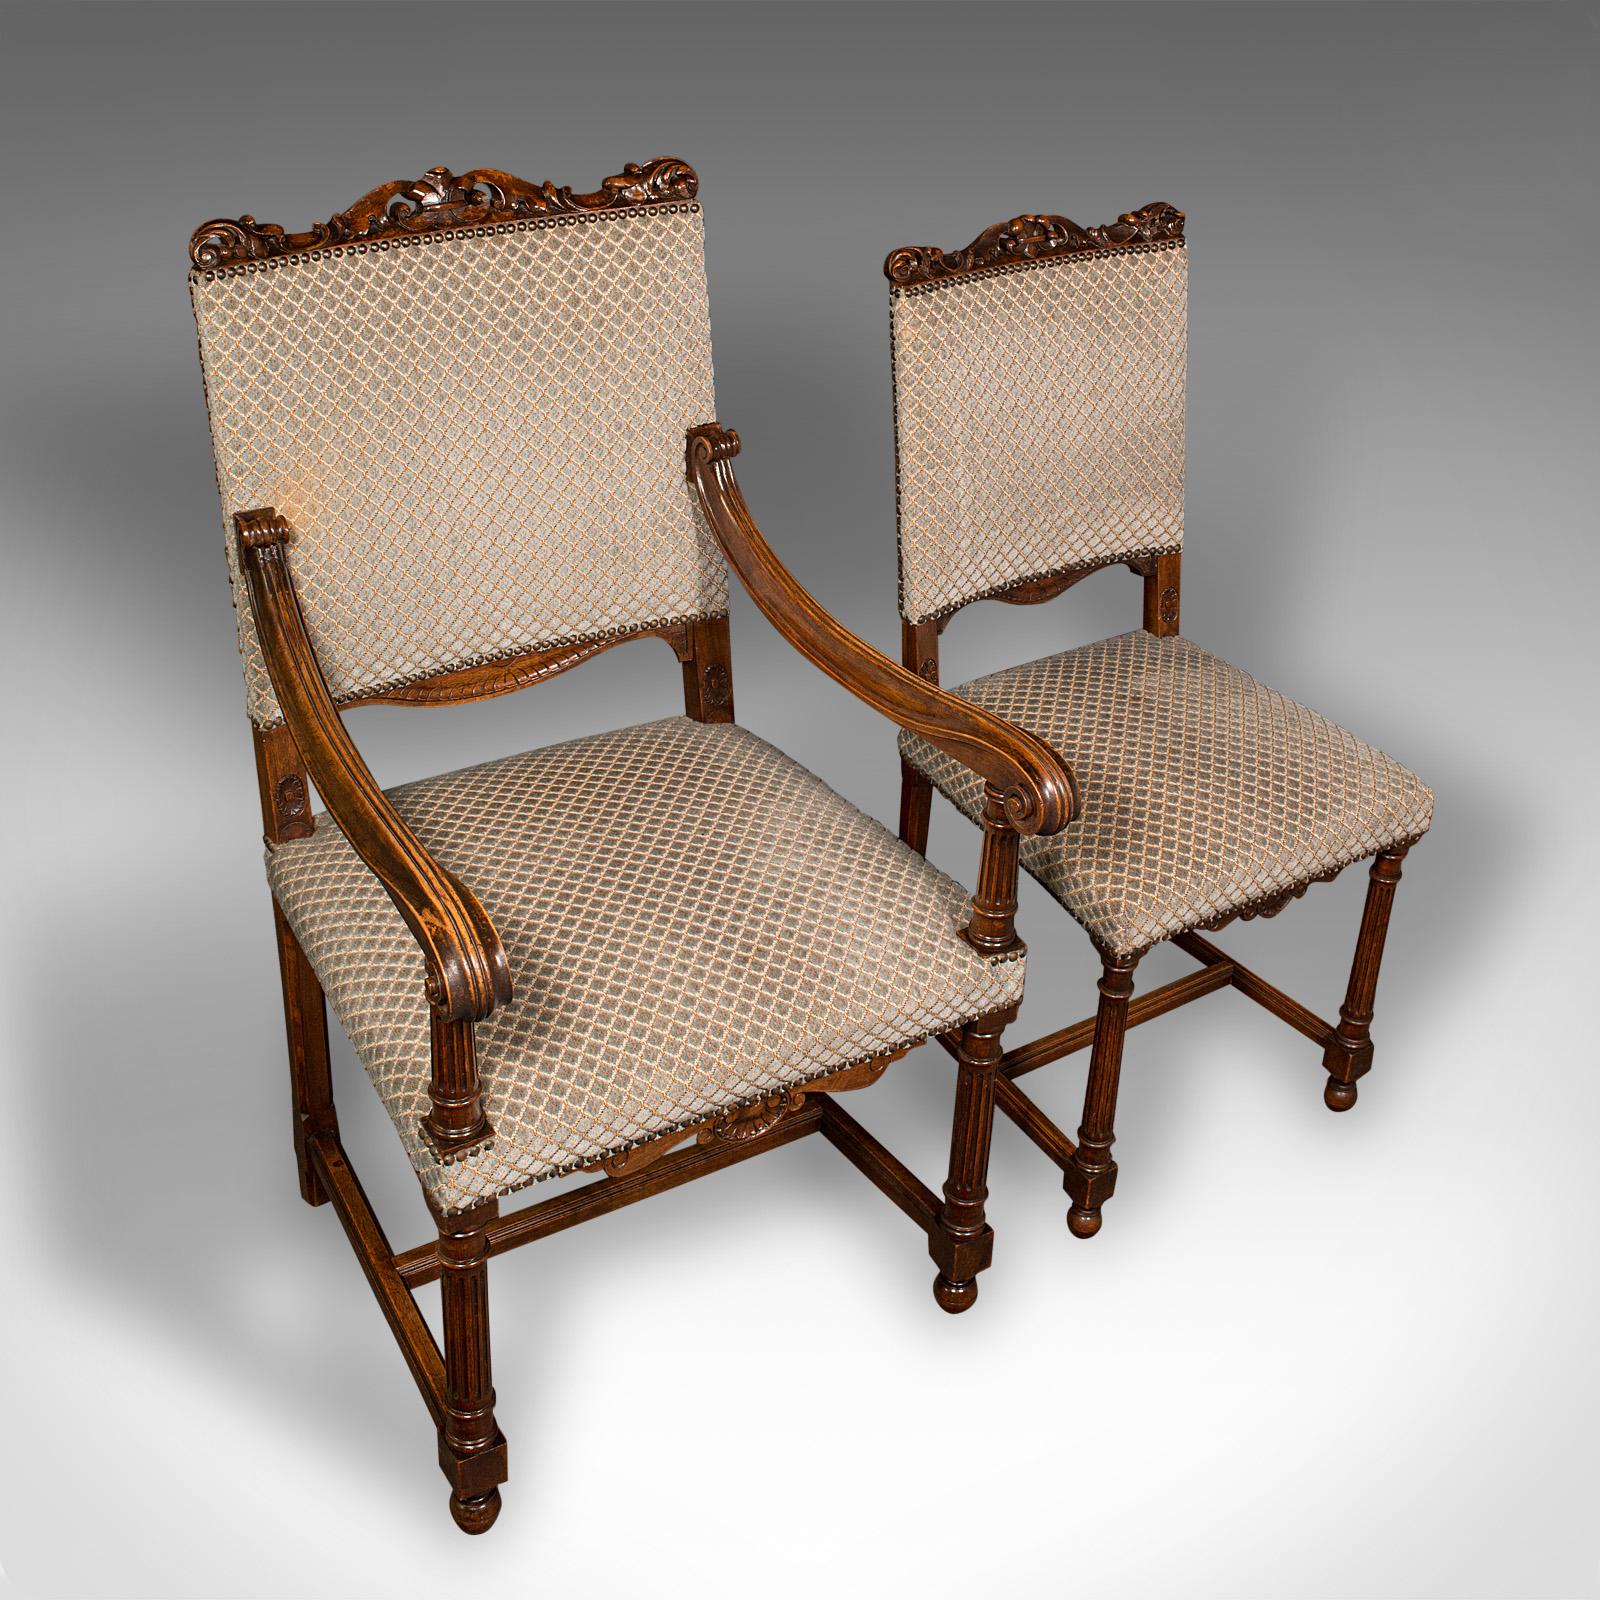 Set of 8 Antique Dining Chairs, English, Walnut, Carver, Seat, Edwardian, c.1910 For Sale 2